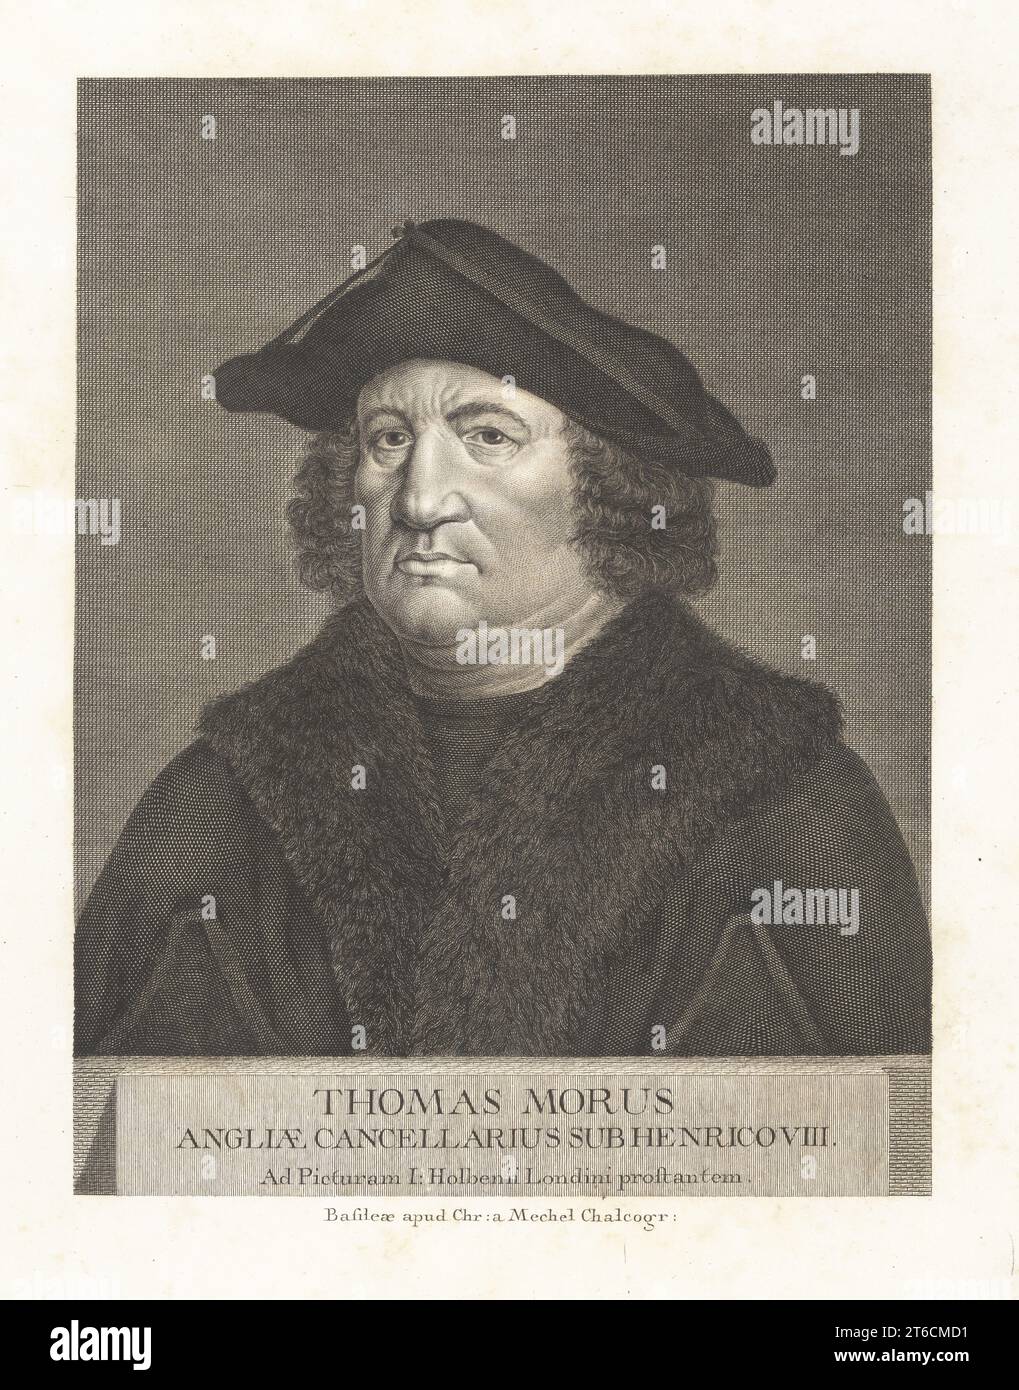 Portrait of Sir Thomas More, 1478-1535. English lawyer, judge,[9] social philosopher, author, statesman, and noted Renaissance humanist. Lord High Chancellor of England under King Henry VIII. Thomas Morus, Angliae Cancellarius sub Henrico VIII. Copperplate engraving by Bartholomaus Hubner after a portrait by Hans Holbein in Christian von Mechel's Oeuvre de Jean Holbein, Chez Guillaume Haas, Basel, 1790. Stock Photo